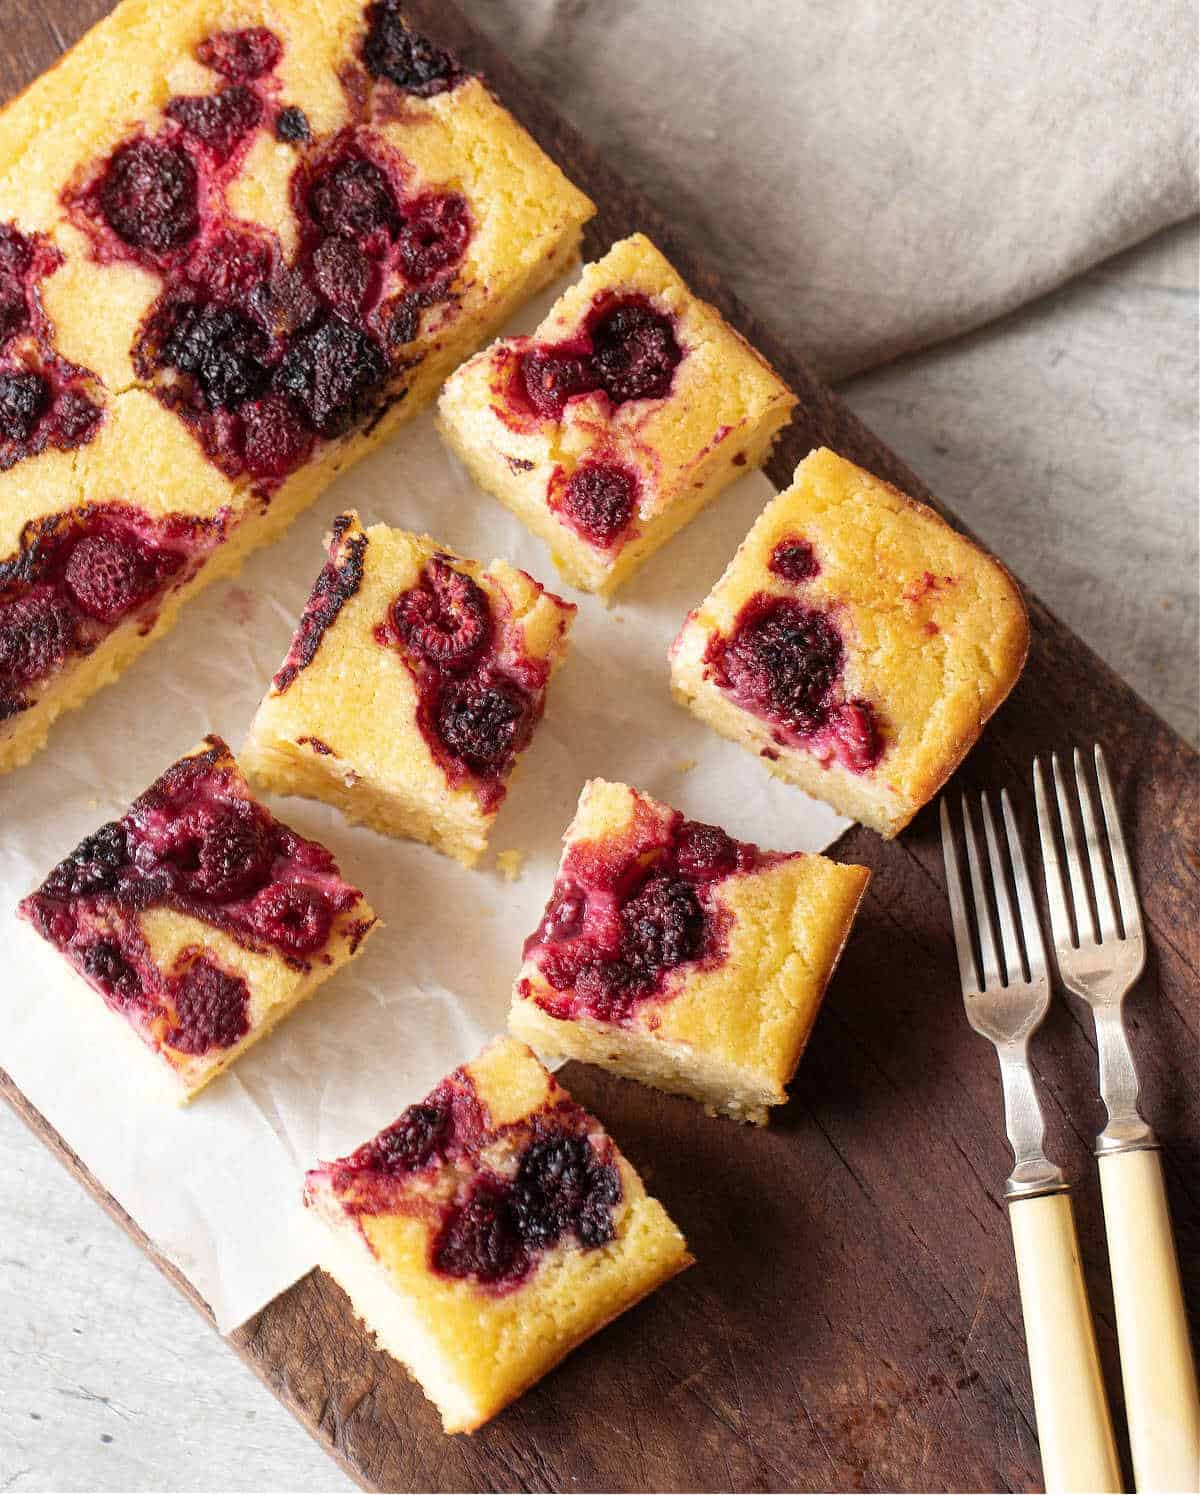 Top view of berry ricotta cake squares on wooden board, two forks.